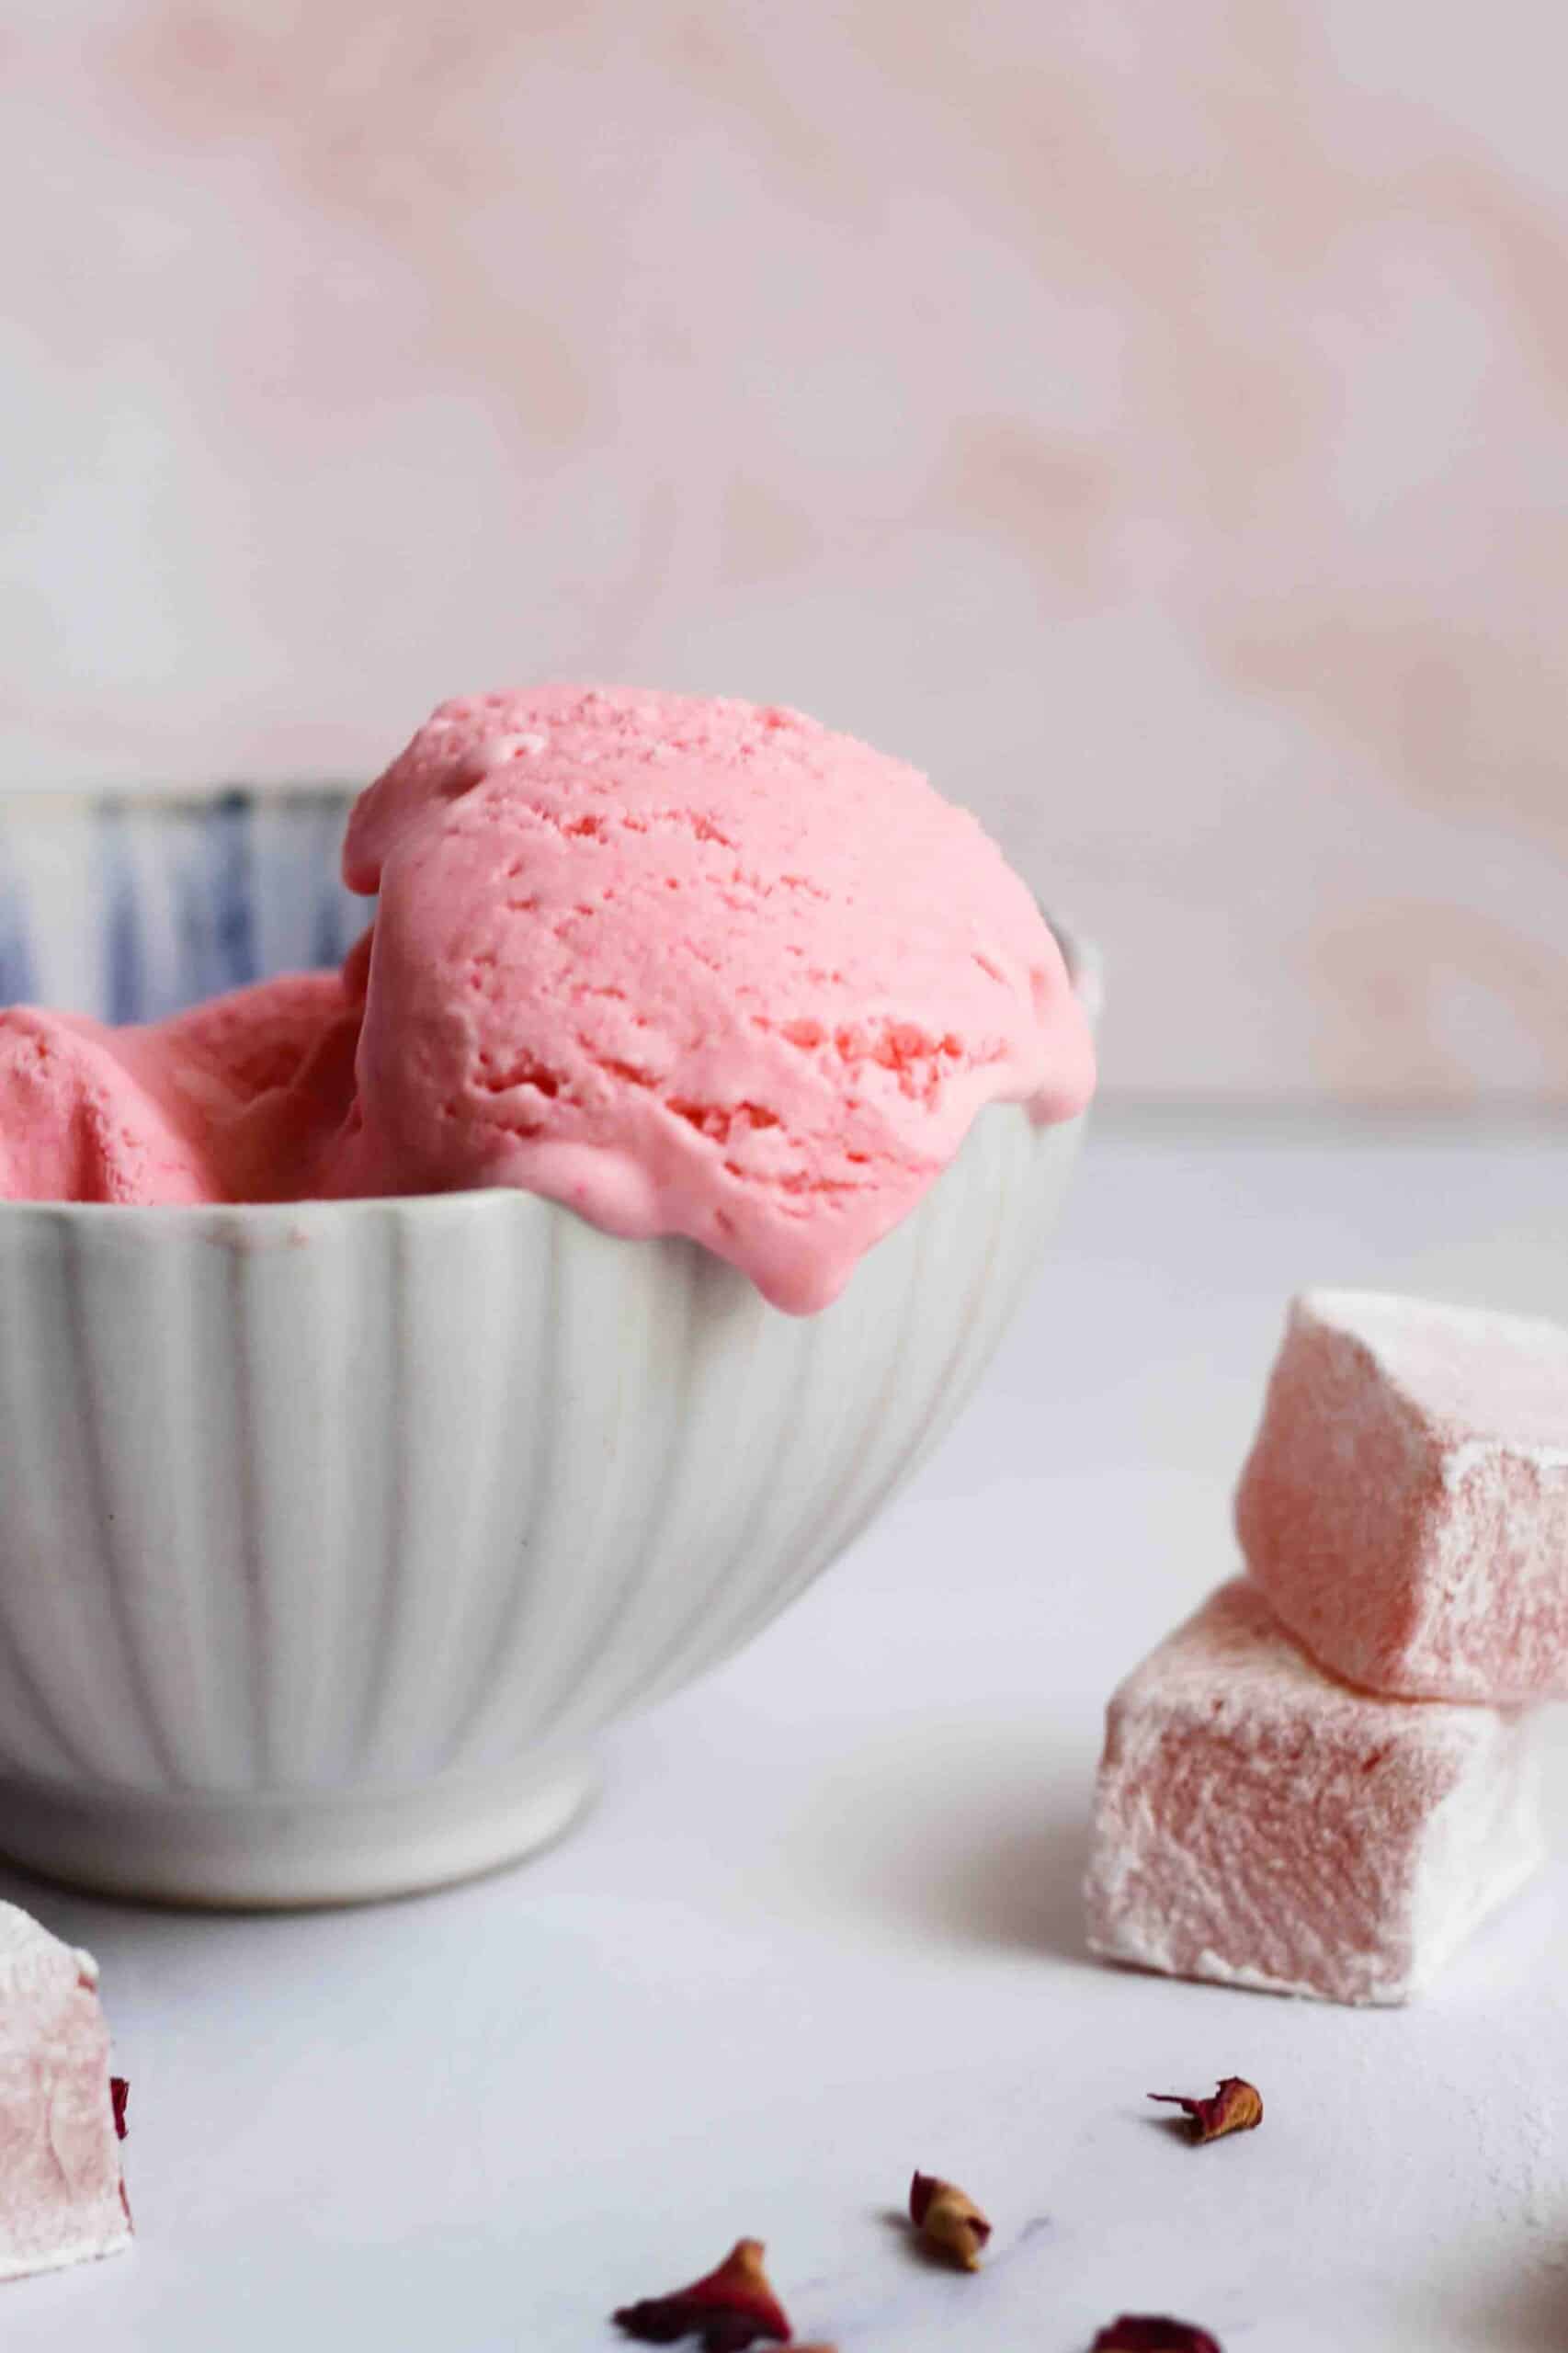 Scoop of pink ice cream flavored with turkish delight and dripping out of a small bowl.